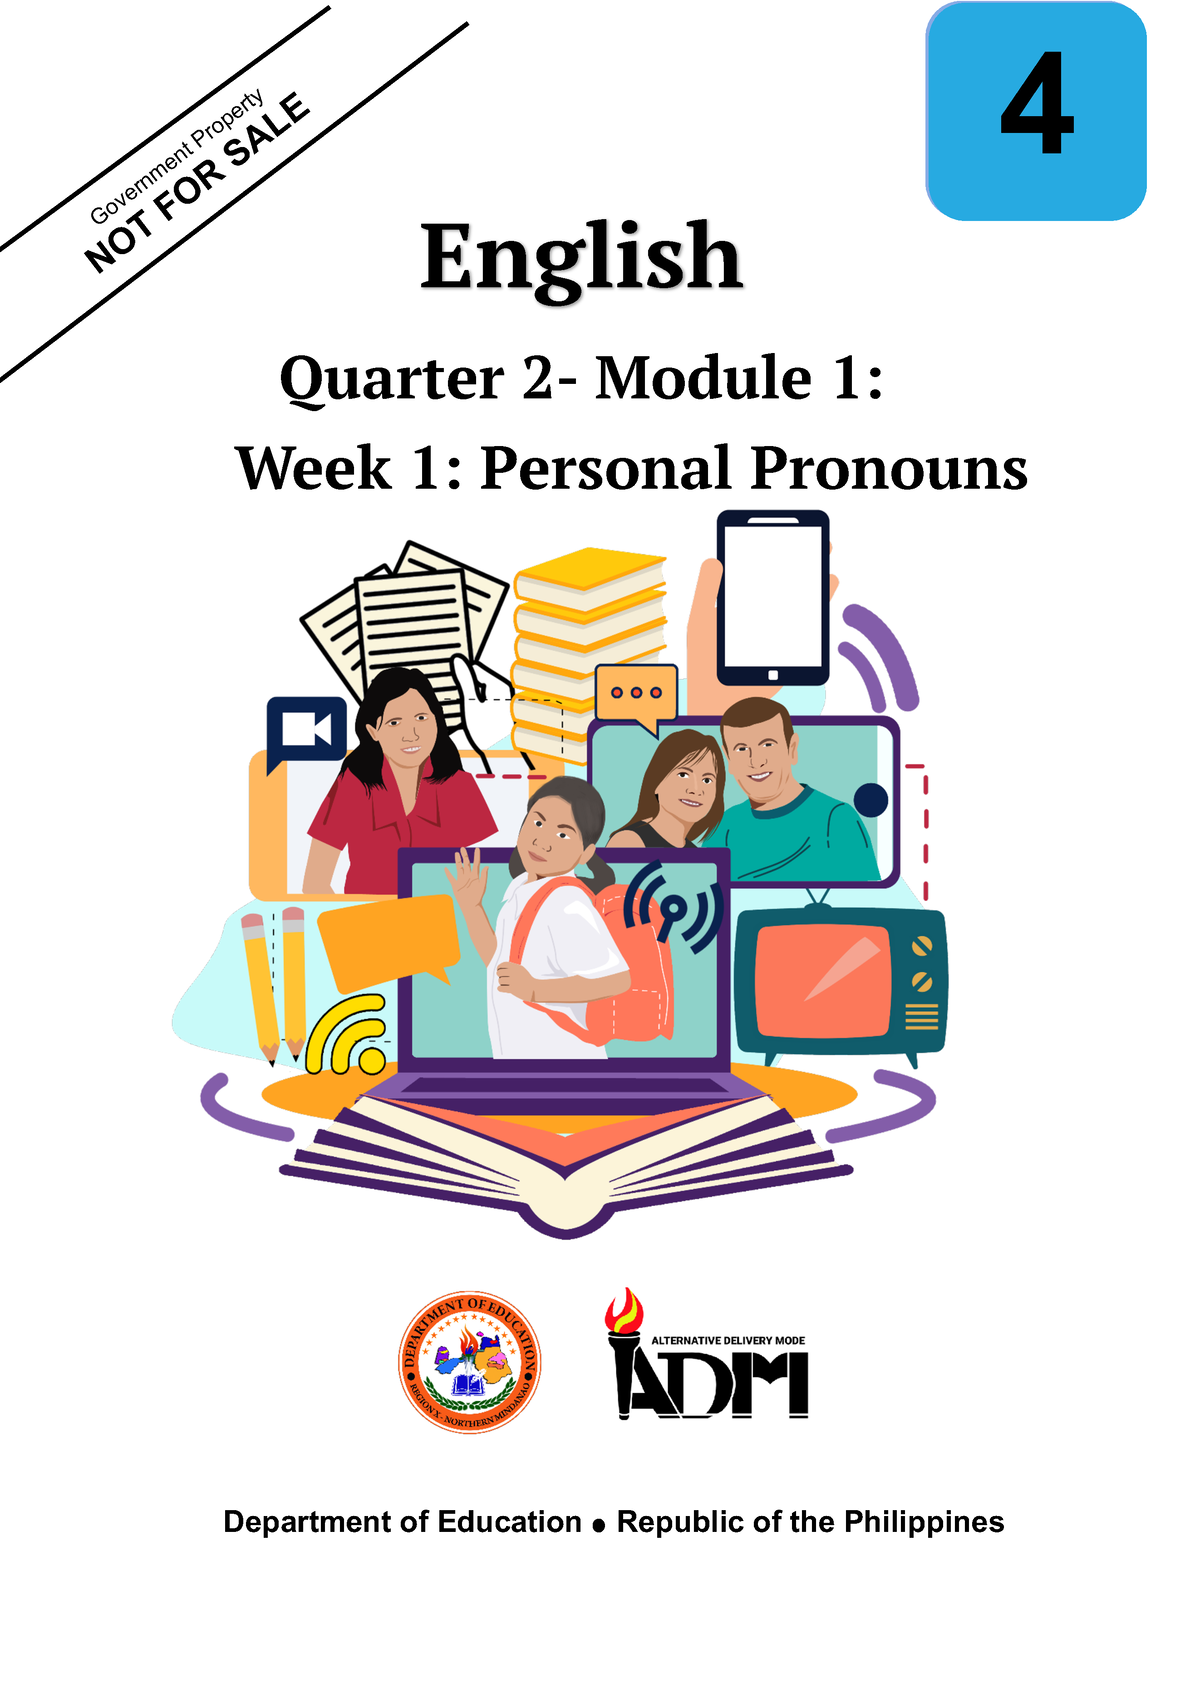 Eng4 Q2 Mod1 Personal Pronouns Version 3 Government Property Not For Sale English Quarter 2 7450